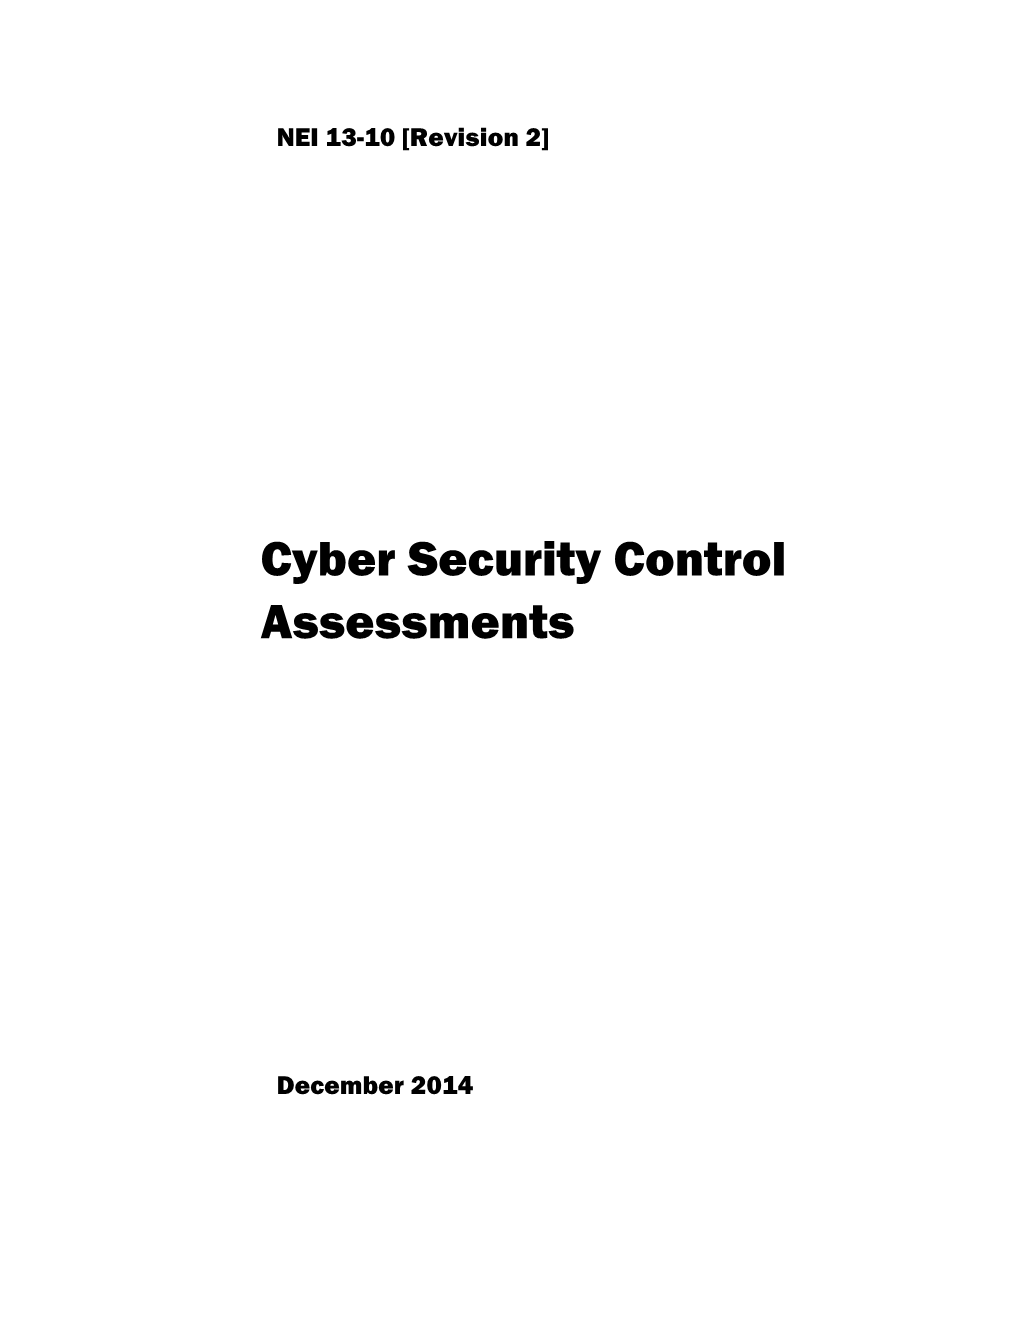 Cyber Security Control Assessments